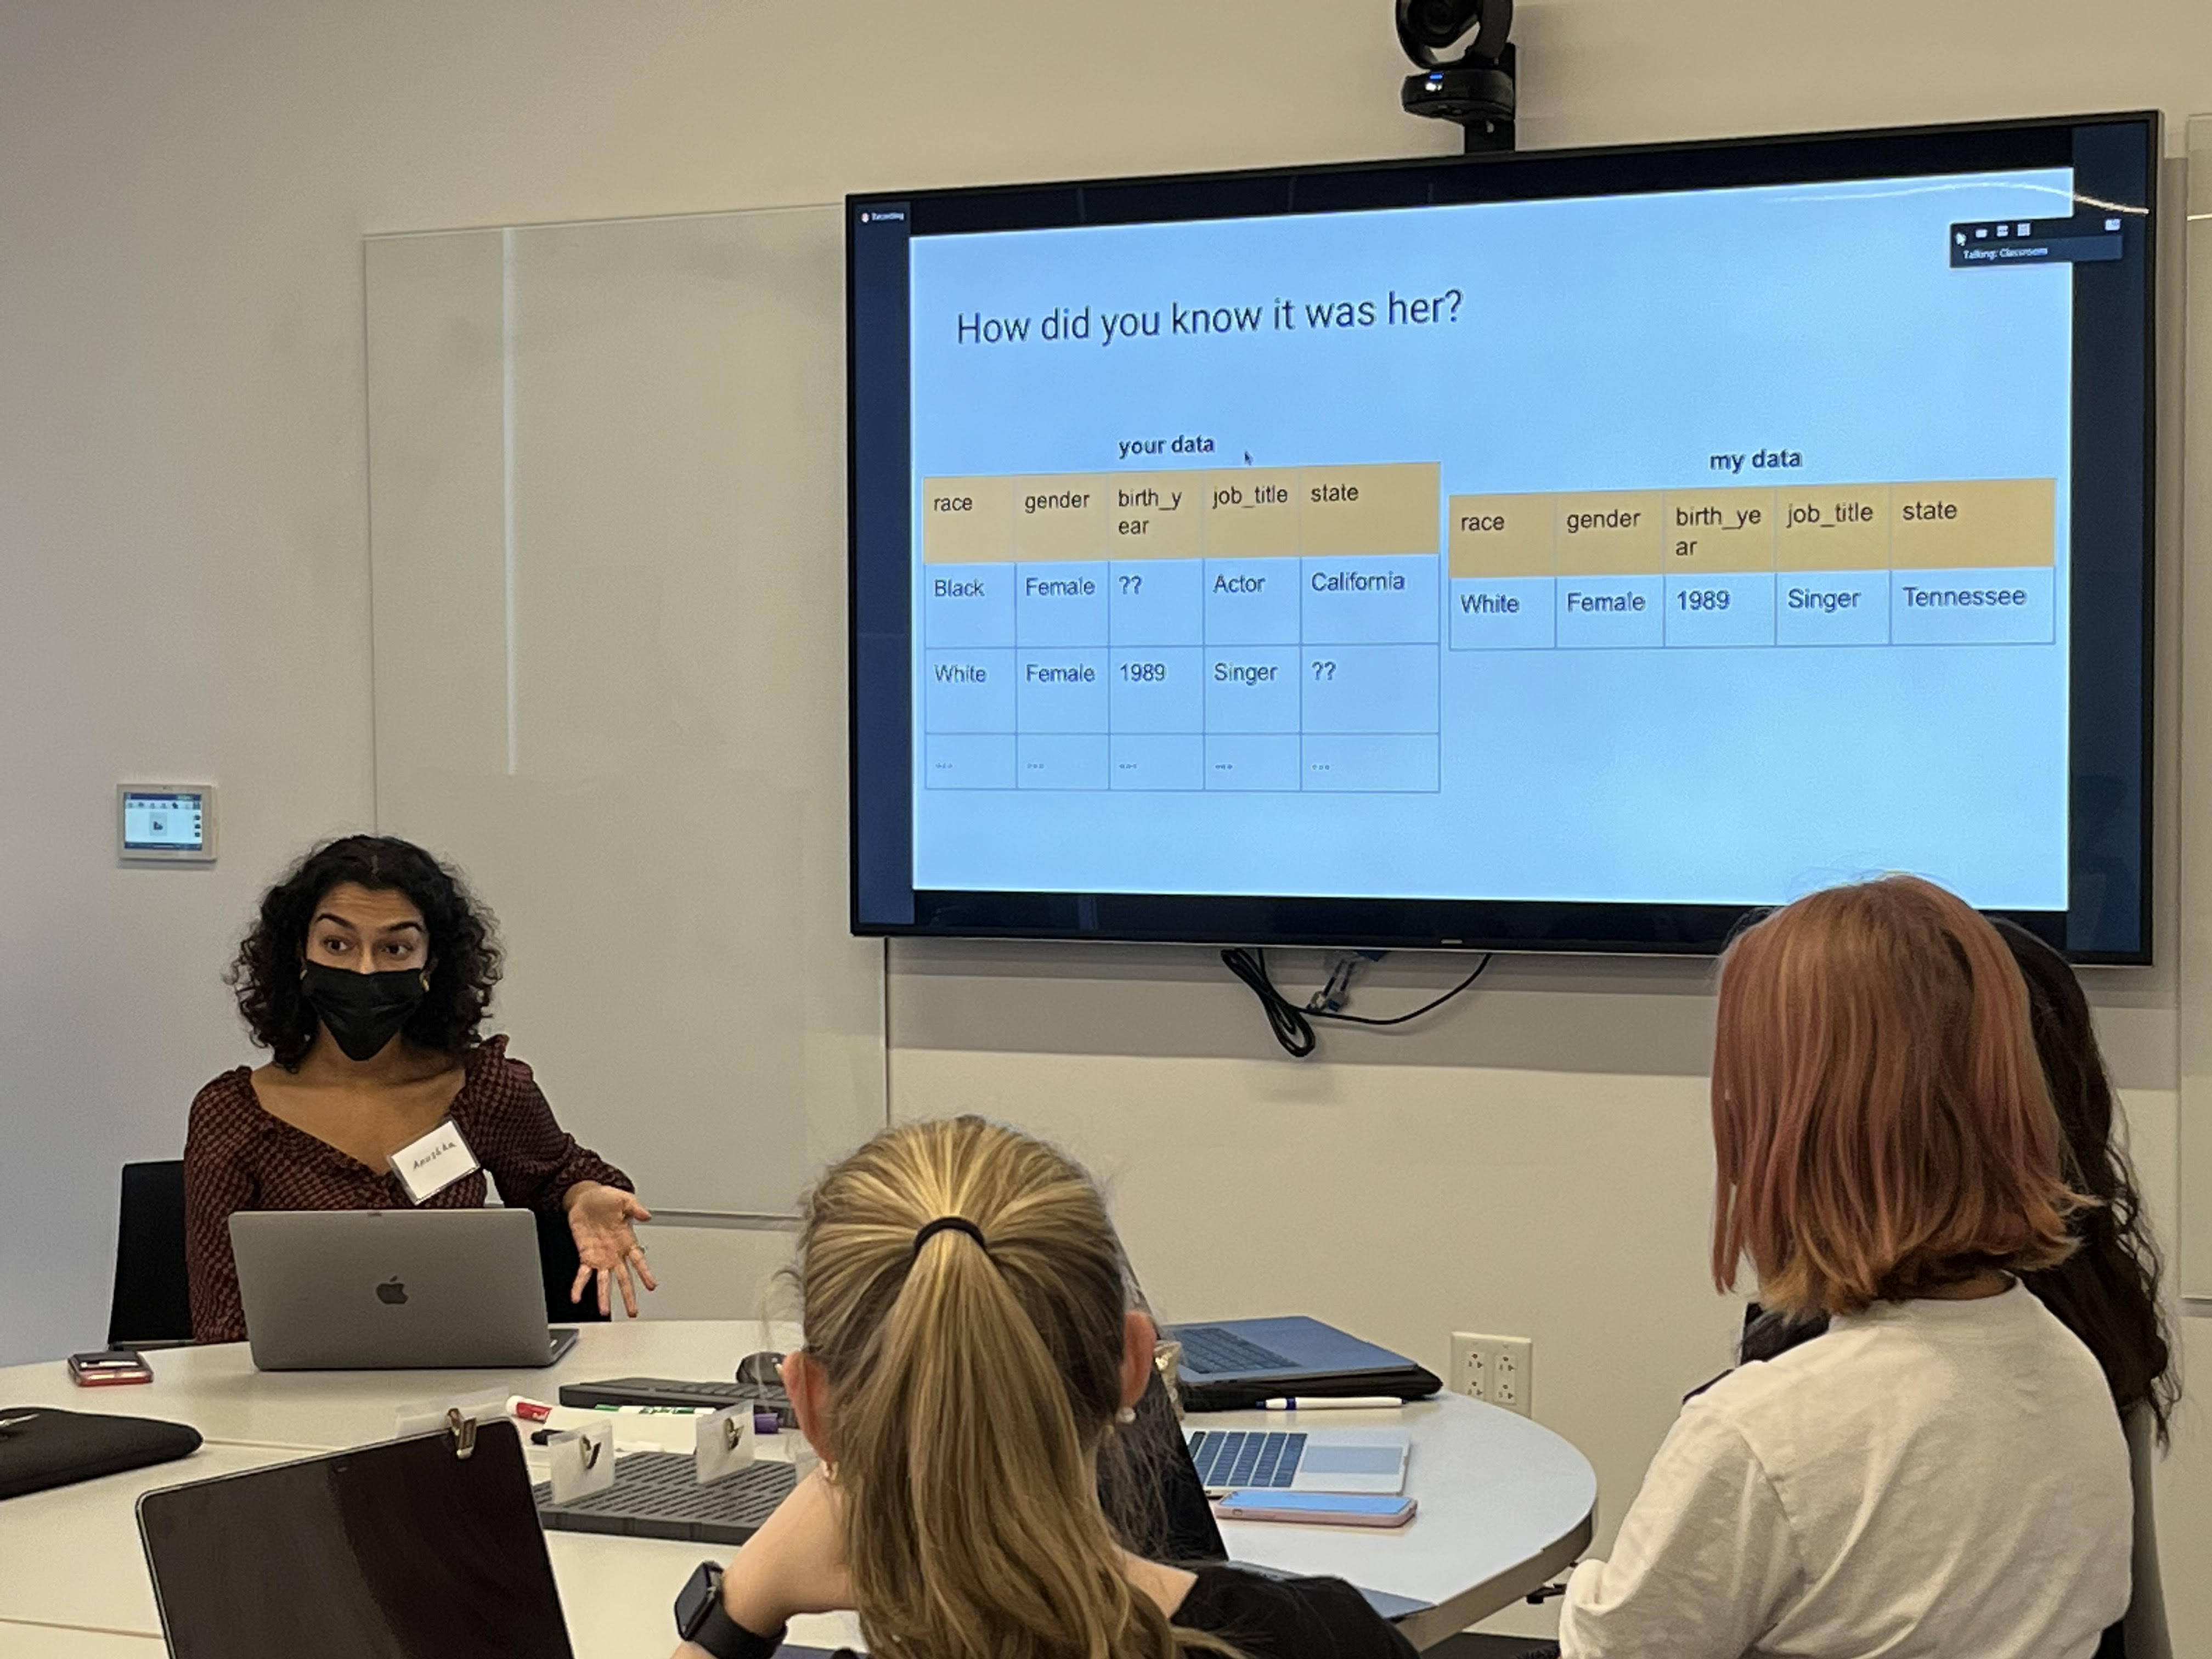 A computing fellow leads a data privacy workshop (with slides show on screen behind her). The backs of students' head is visible in the foreground.s  